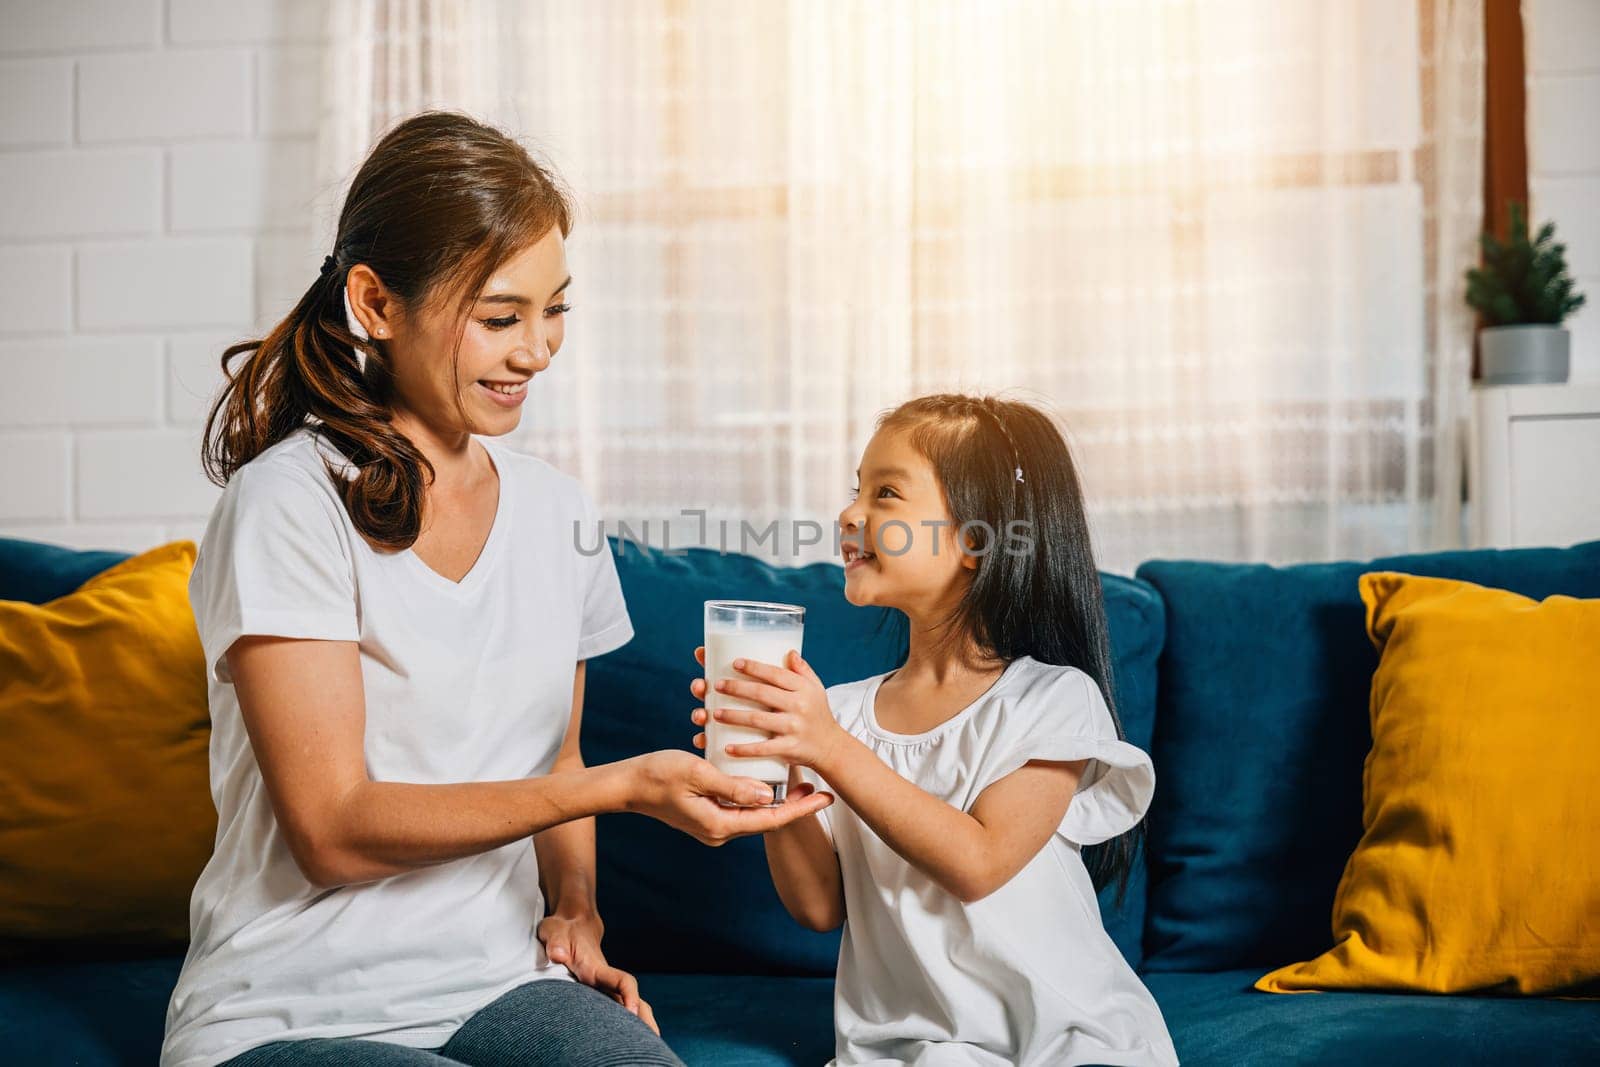 A joyful scene as an Asian mother gives her daughter a glass of milk on the living room sofa. This image radiates affection innocence and the happiness of family breakfasts.